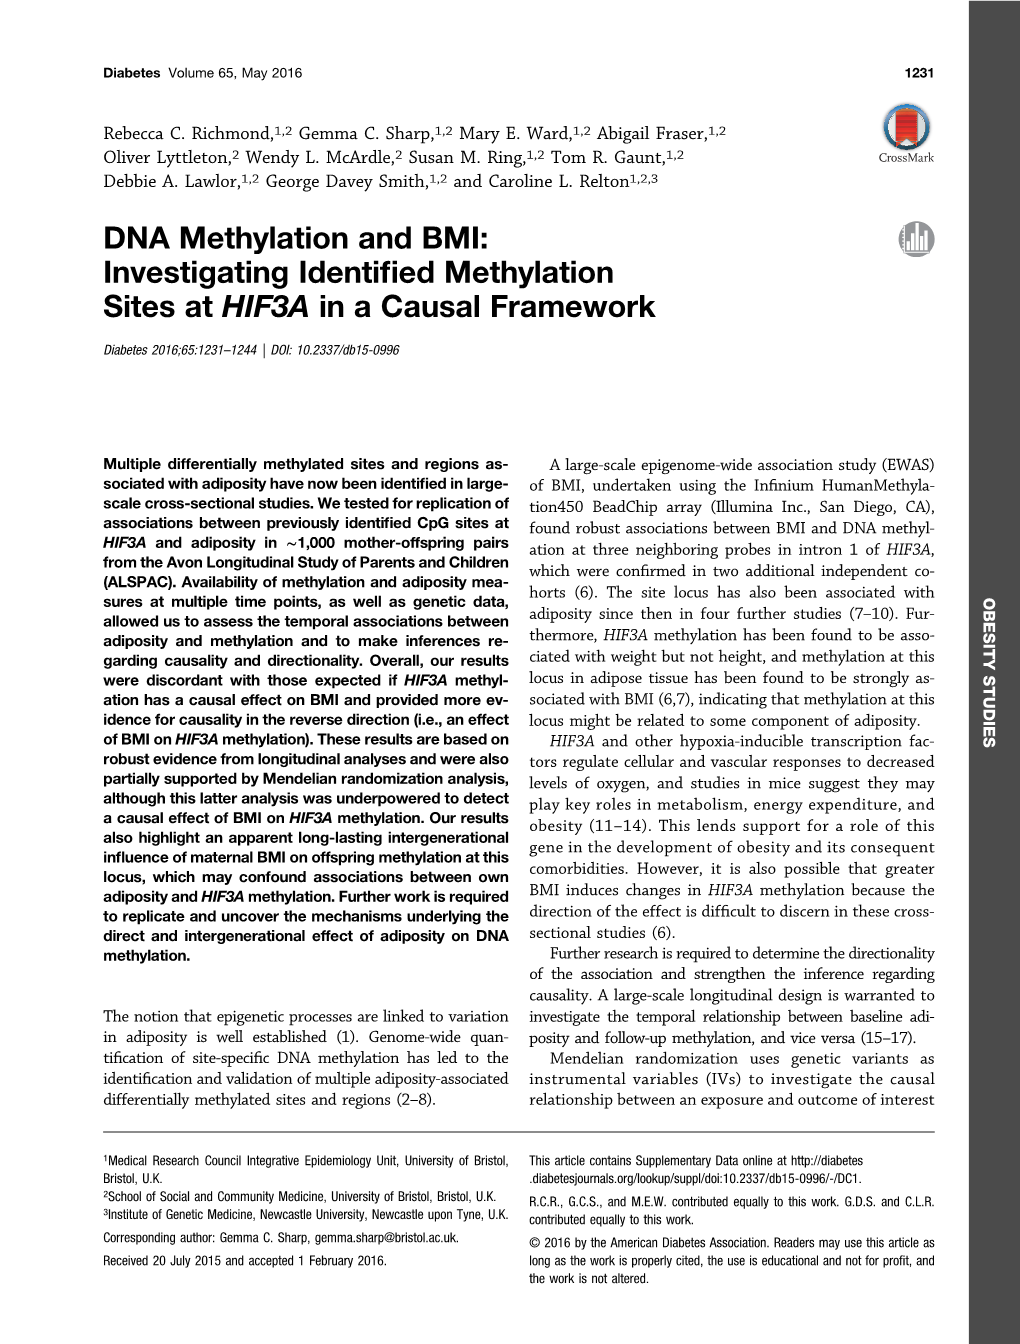 DNA Methylation and BMI: Investigating Identiﬁed Methylation Sites at HIF3A in a Causal Framework